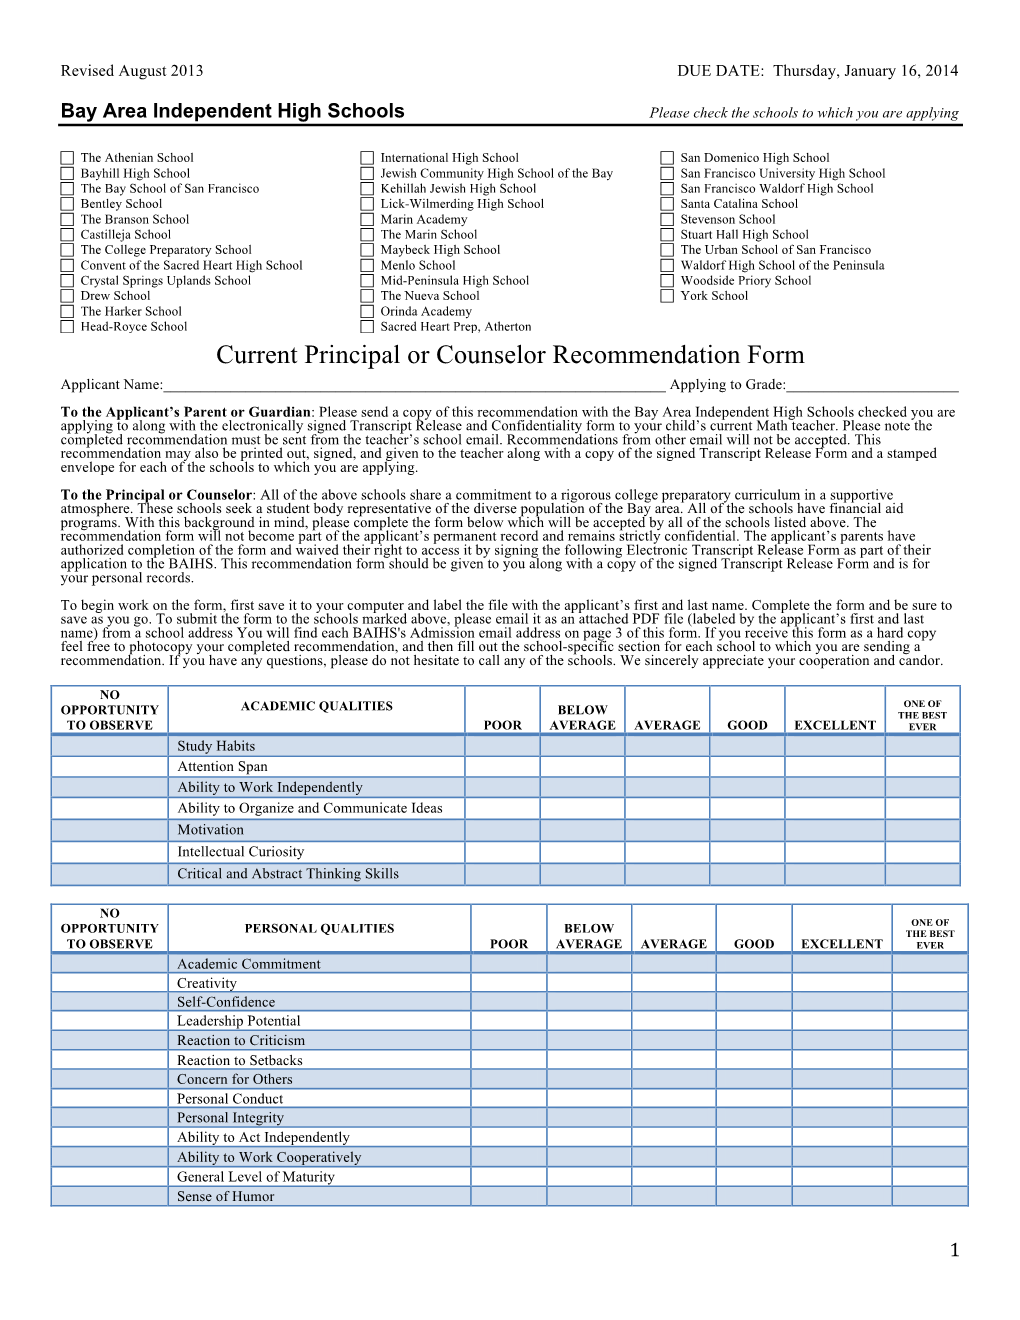 Current Principal Or Counselor Recommendation Form